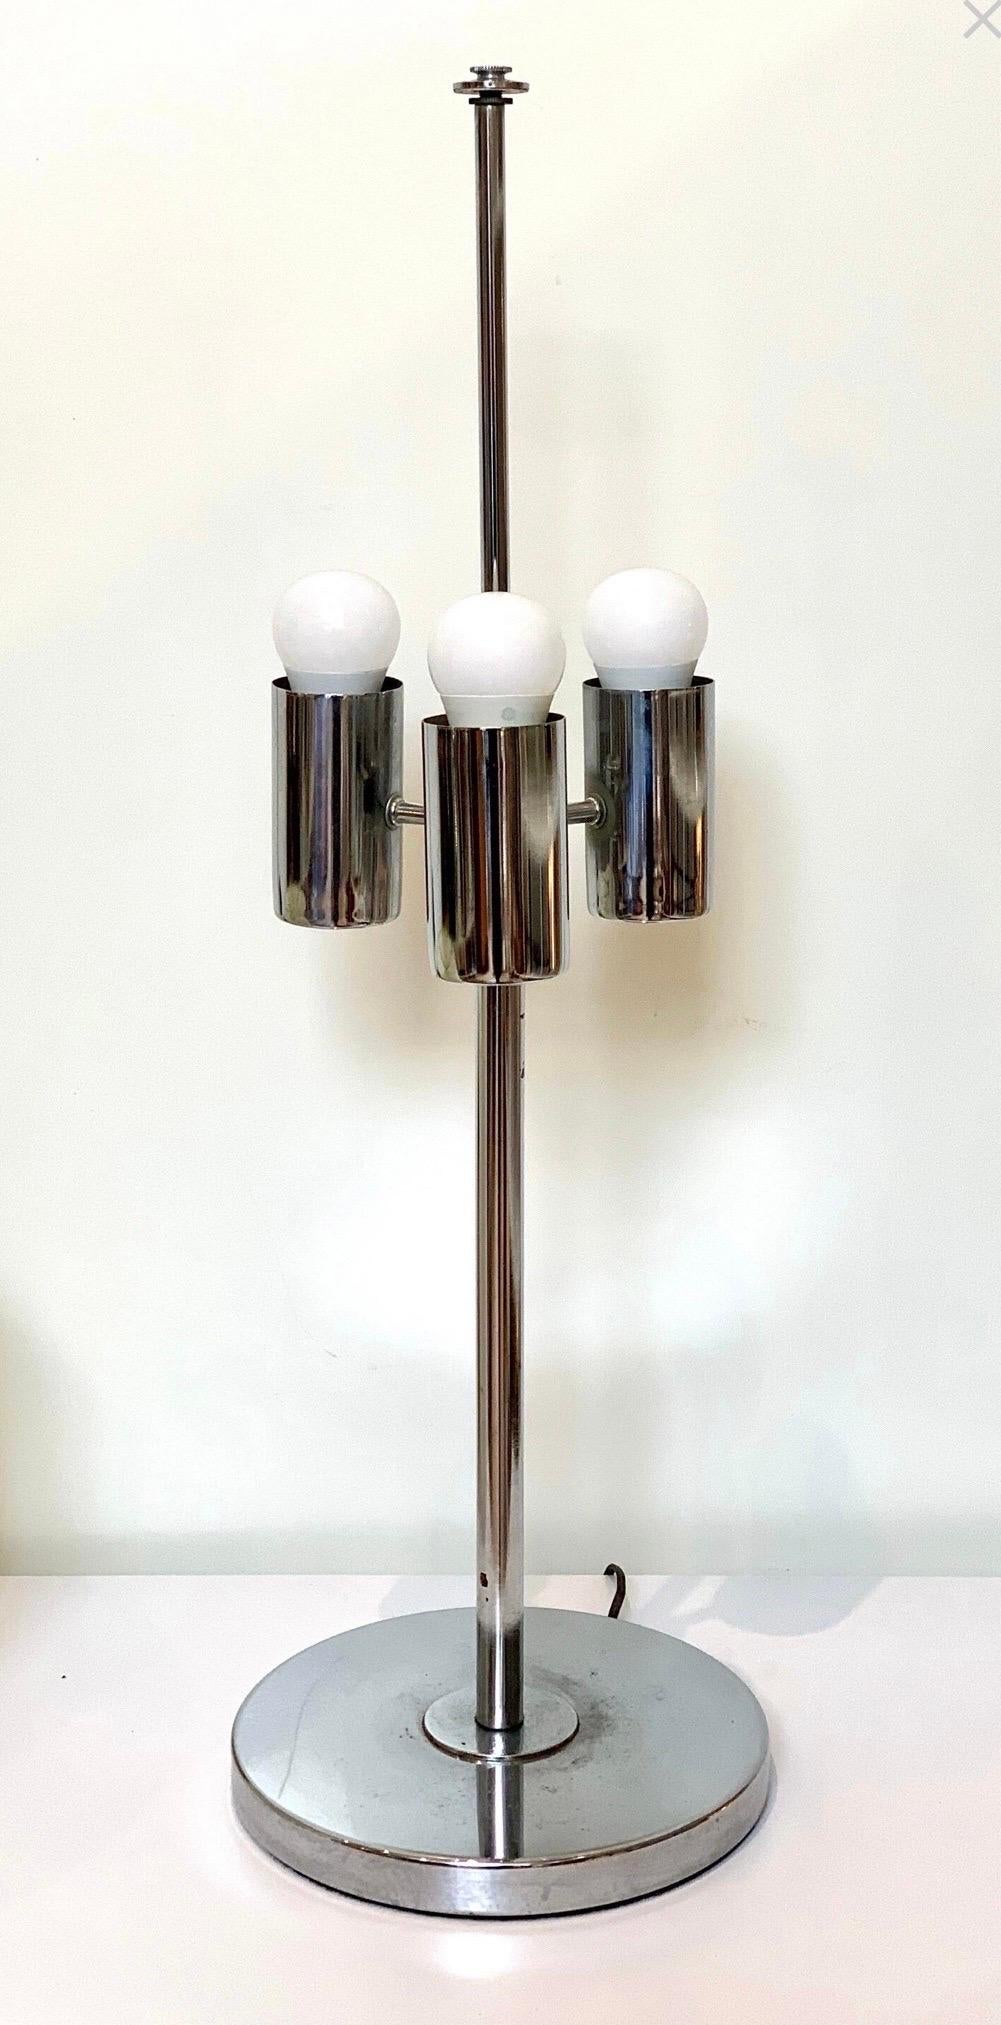 Mid-Century Modern chrome table lamp by Robert Sonneman with three lights and original shade. In excellent condition, with wear typical for age and use.

Lamp measures 10